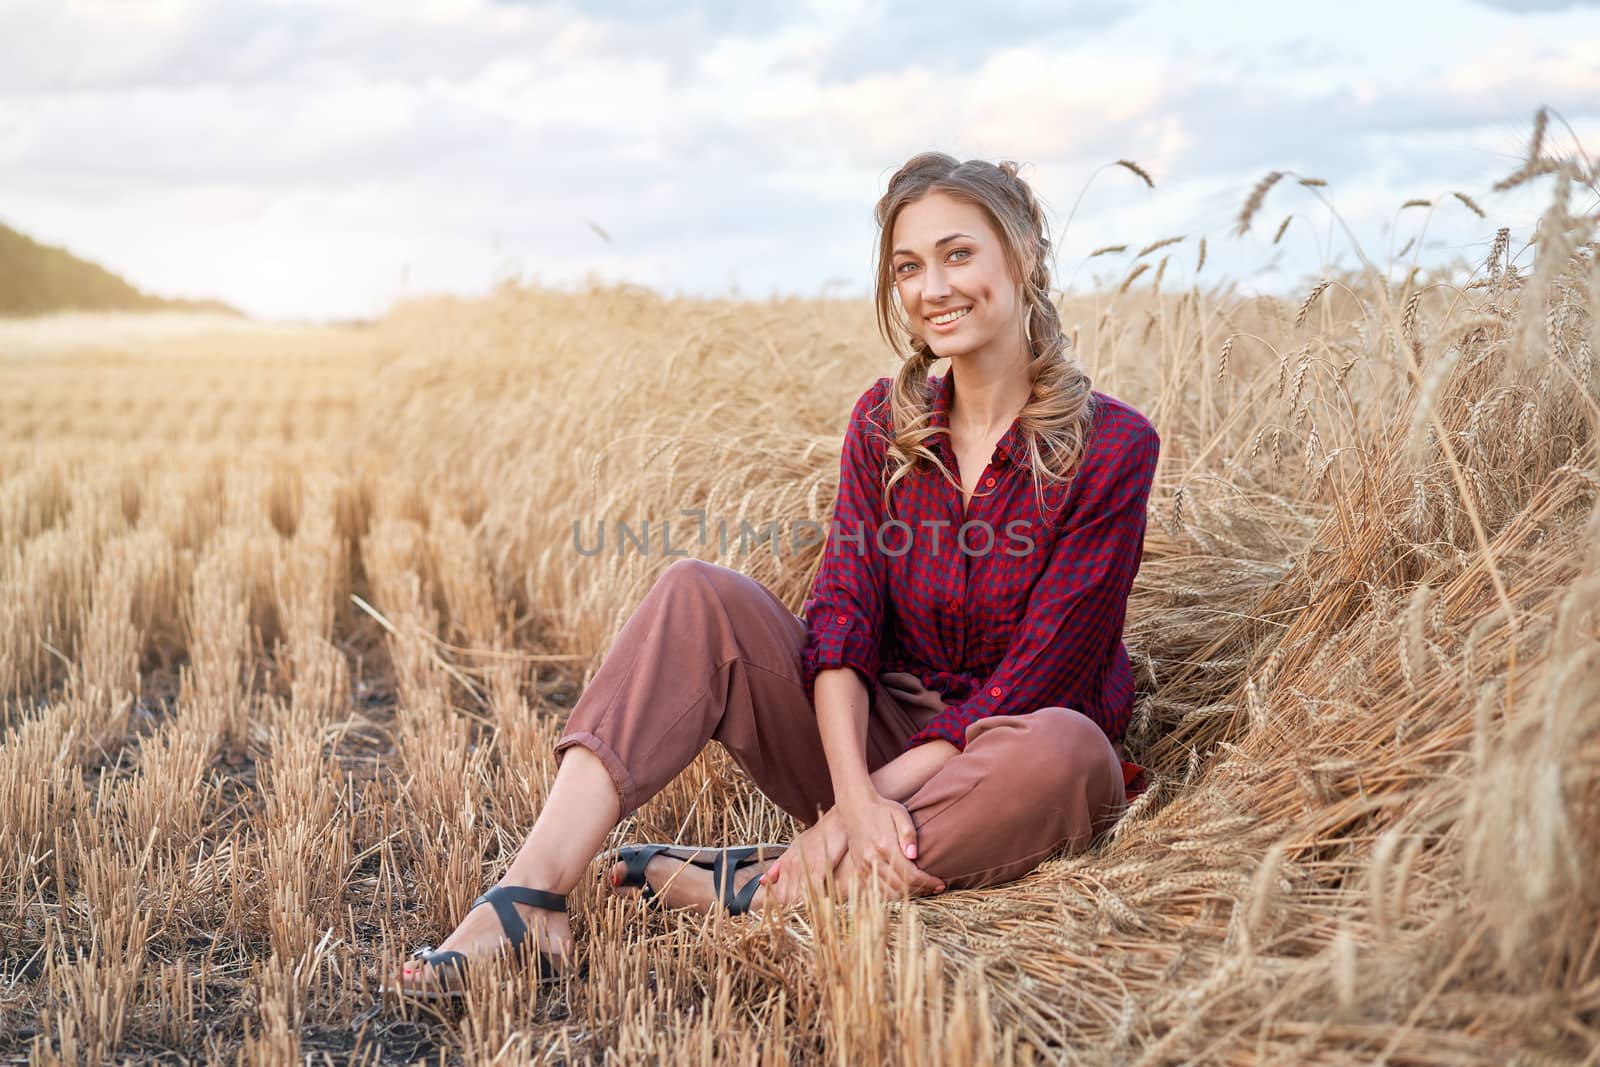 Woman farmer sitting farmland smiling Female agronomist specialist farming agribusiness Happy positive caucasian worker agricultural field dressed red checkered shirt and bandana Red plaid shirt.